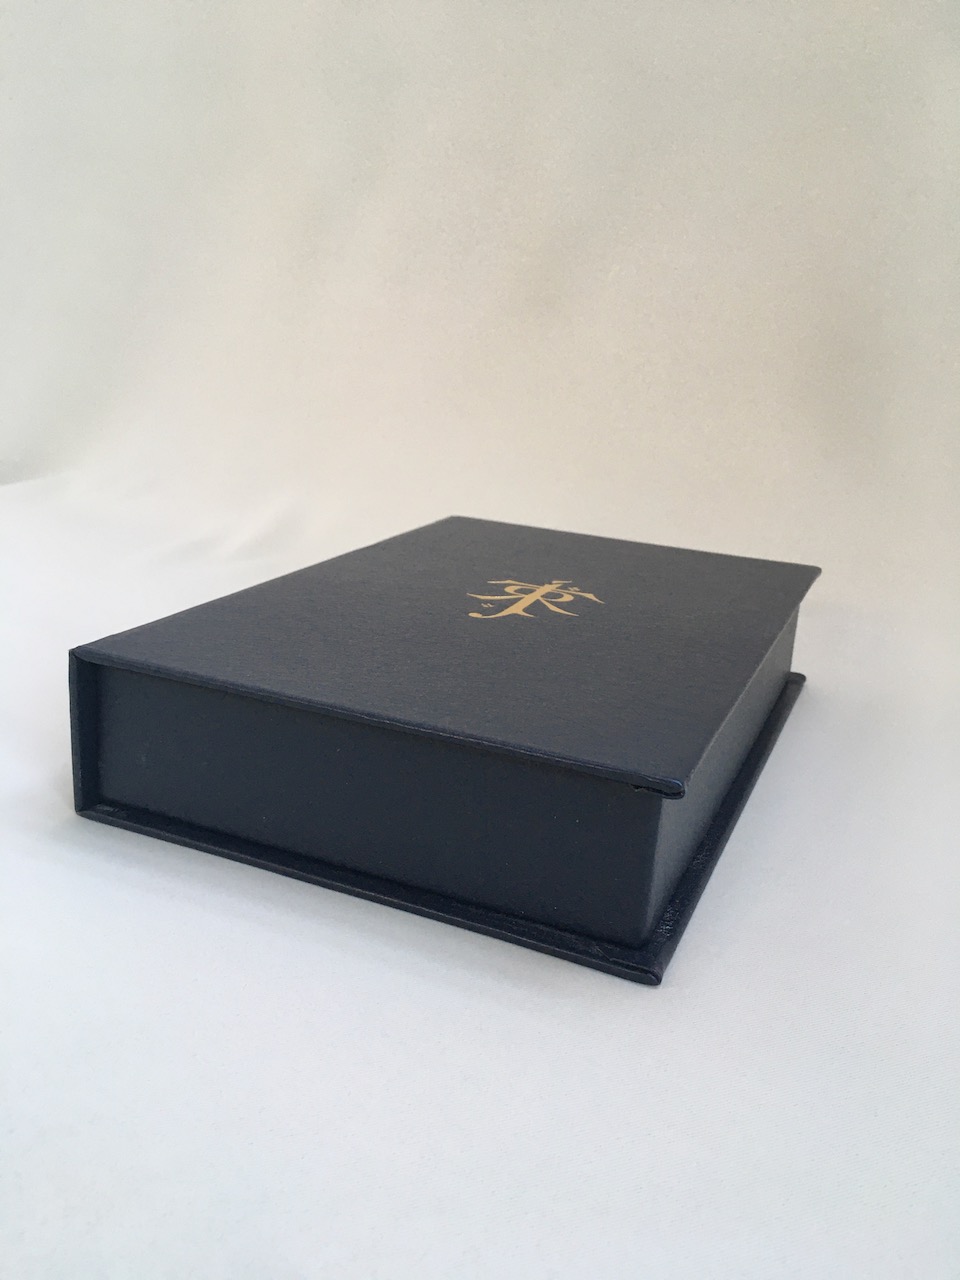 
The Children of Hurin Leather Signed Limited Edition - Super Deluxe Edition 9